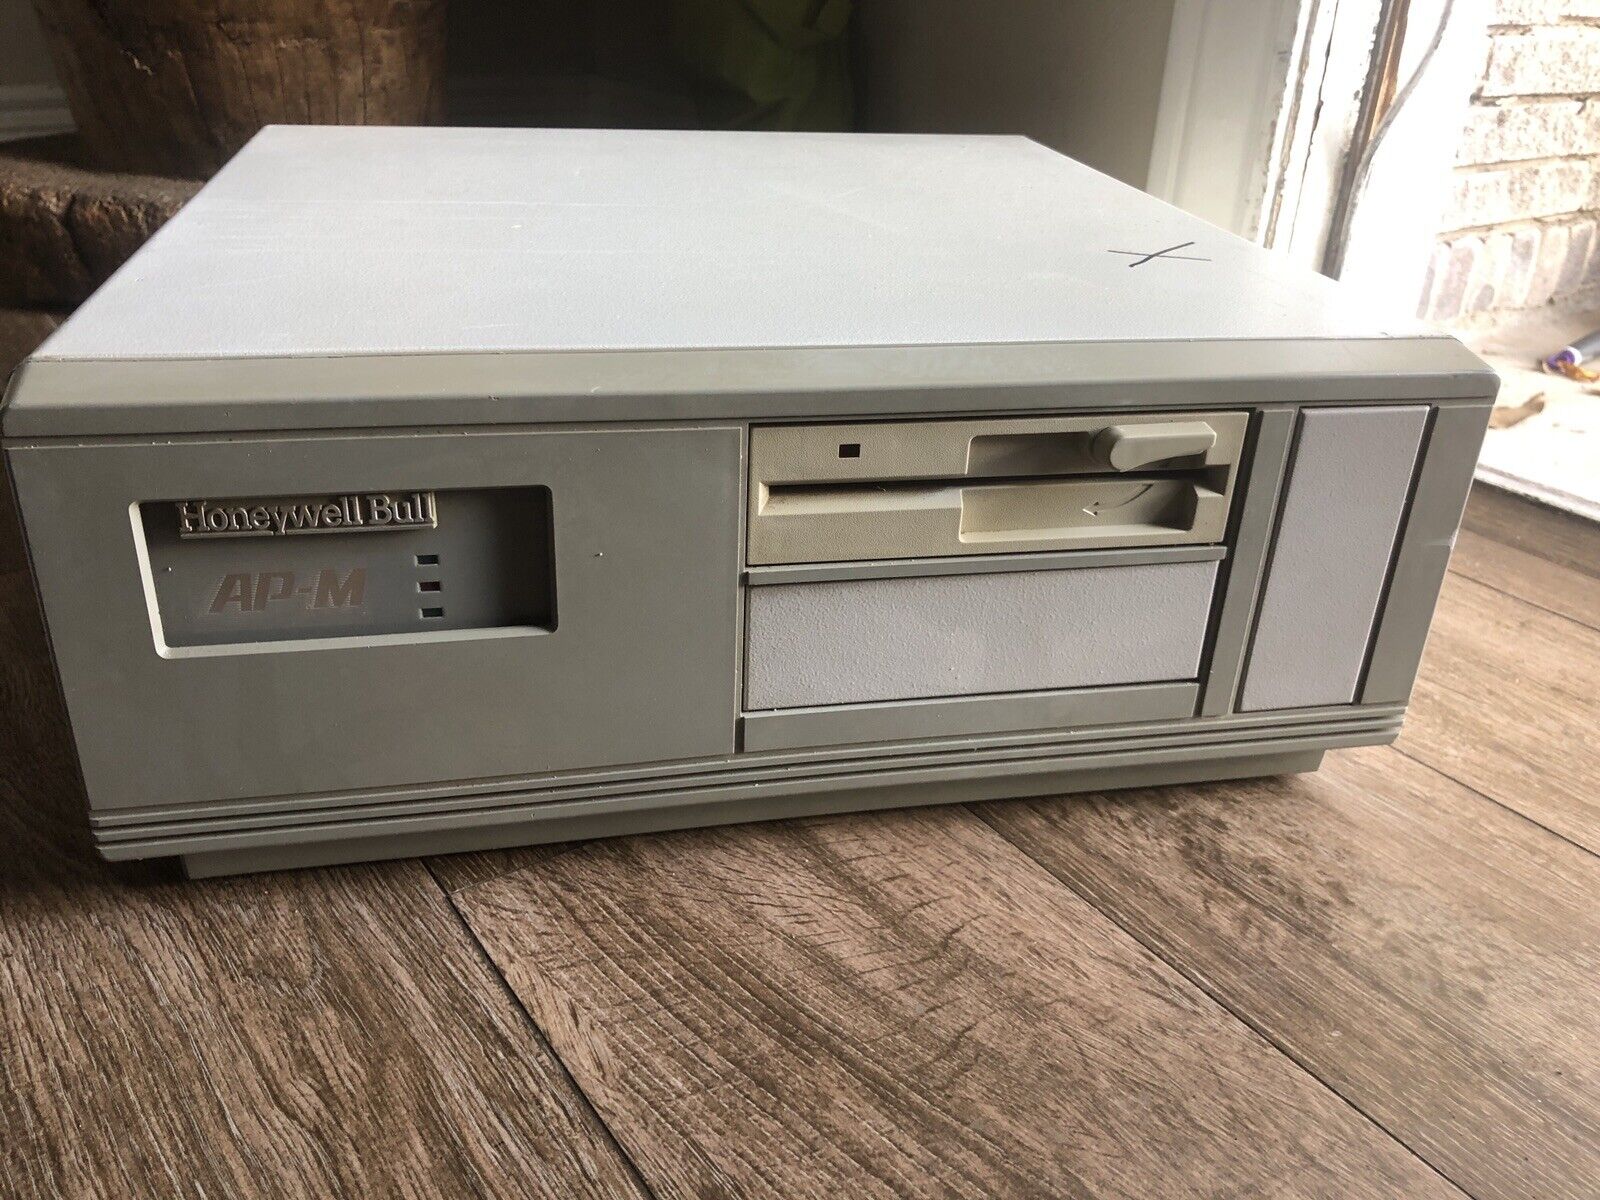 RARE Vintage Honeywell Bull AP-M 286 Computer For Parts Not Working NEC 16T